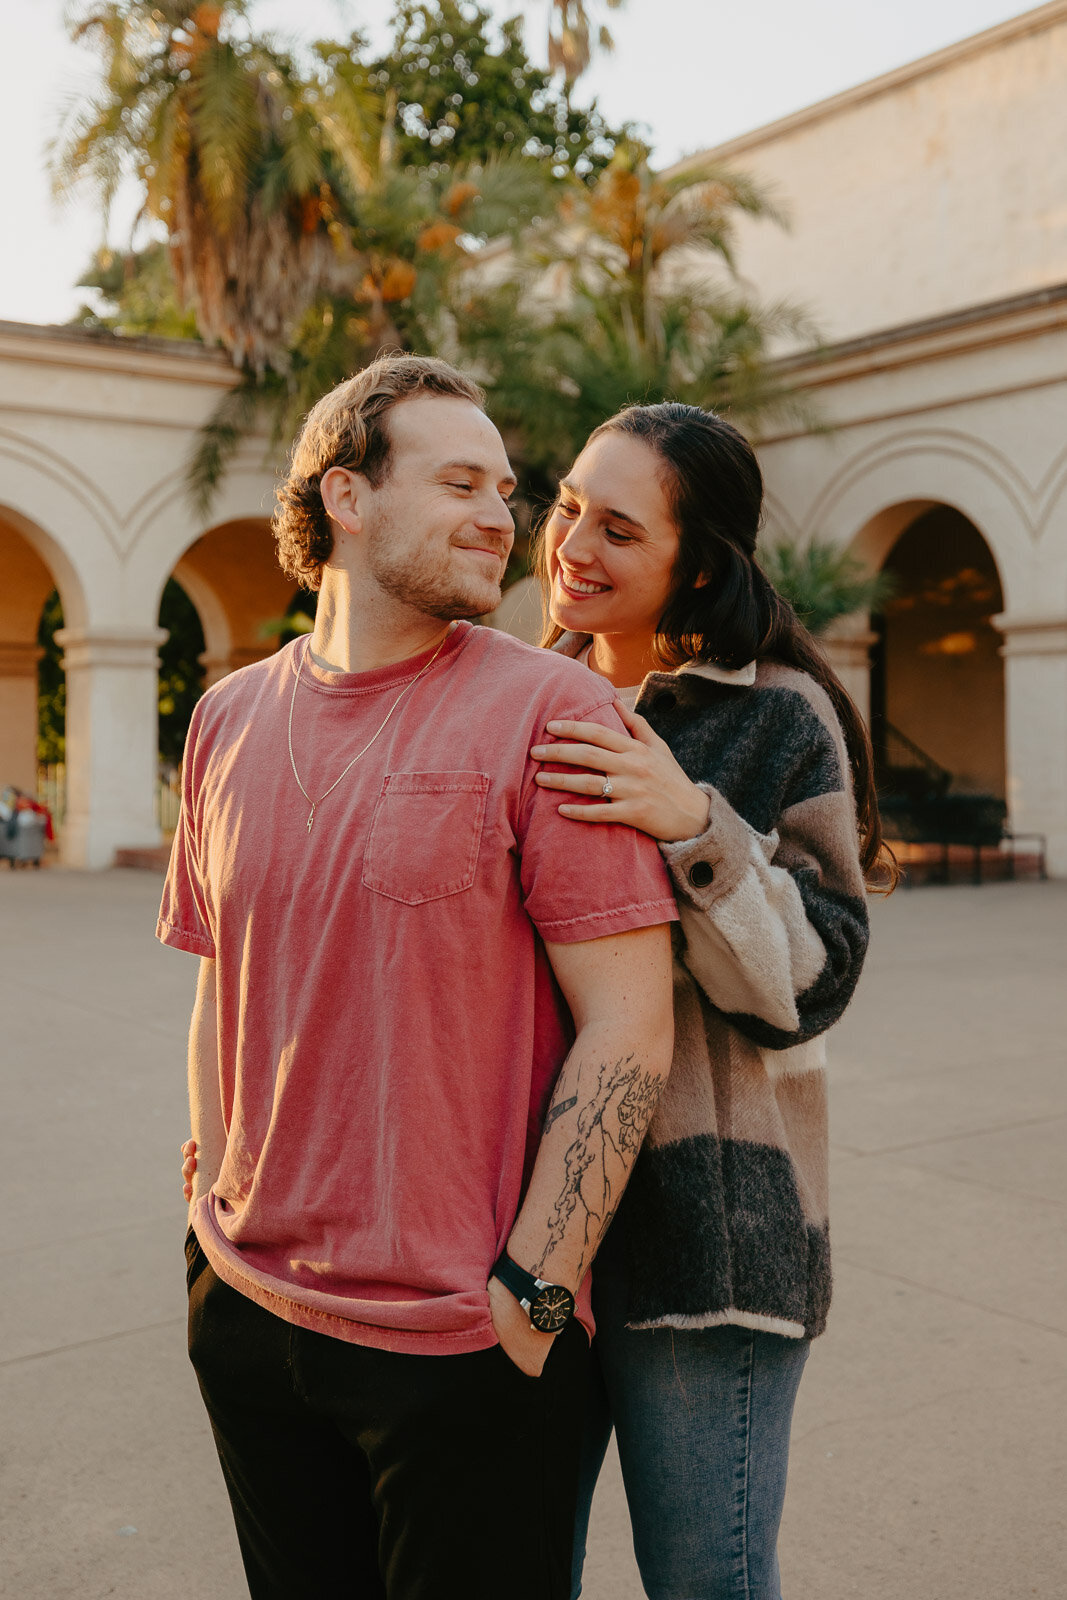 Lexx-Creative-Balboa-Park-With-Dogs-Engagement-14